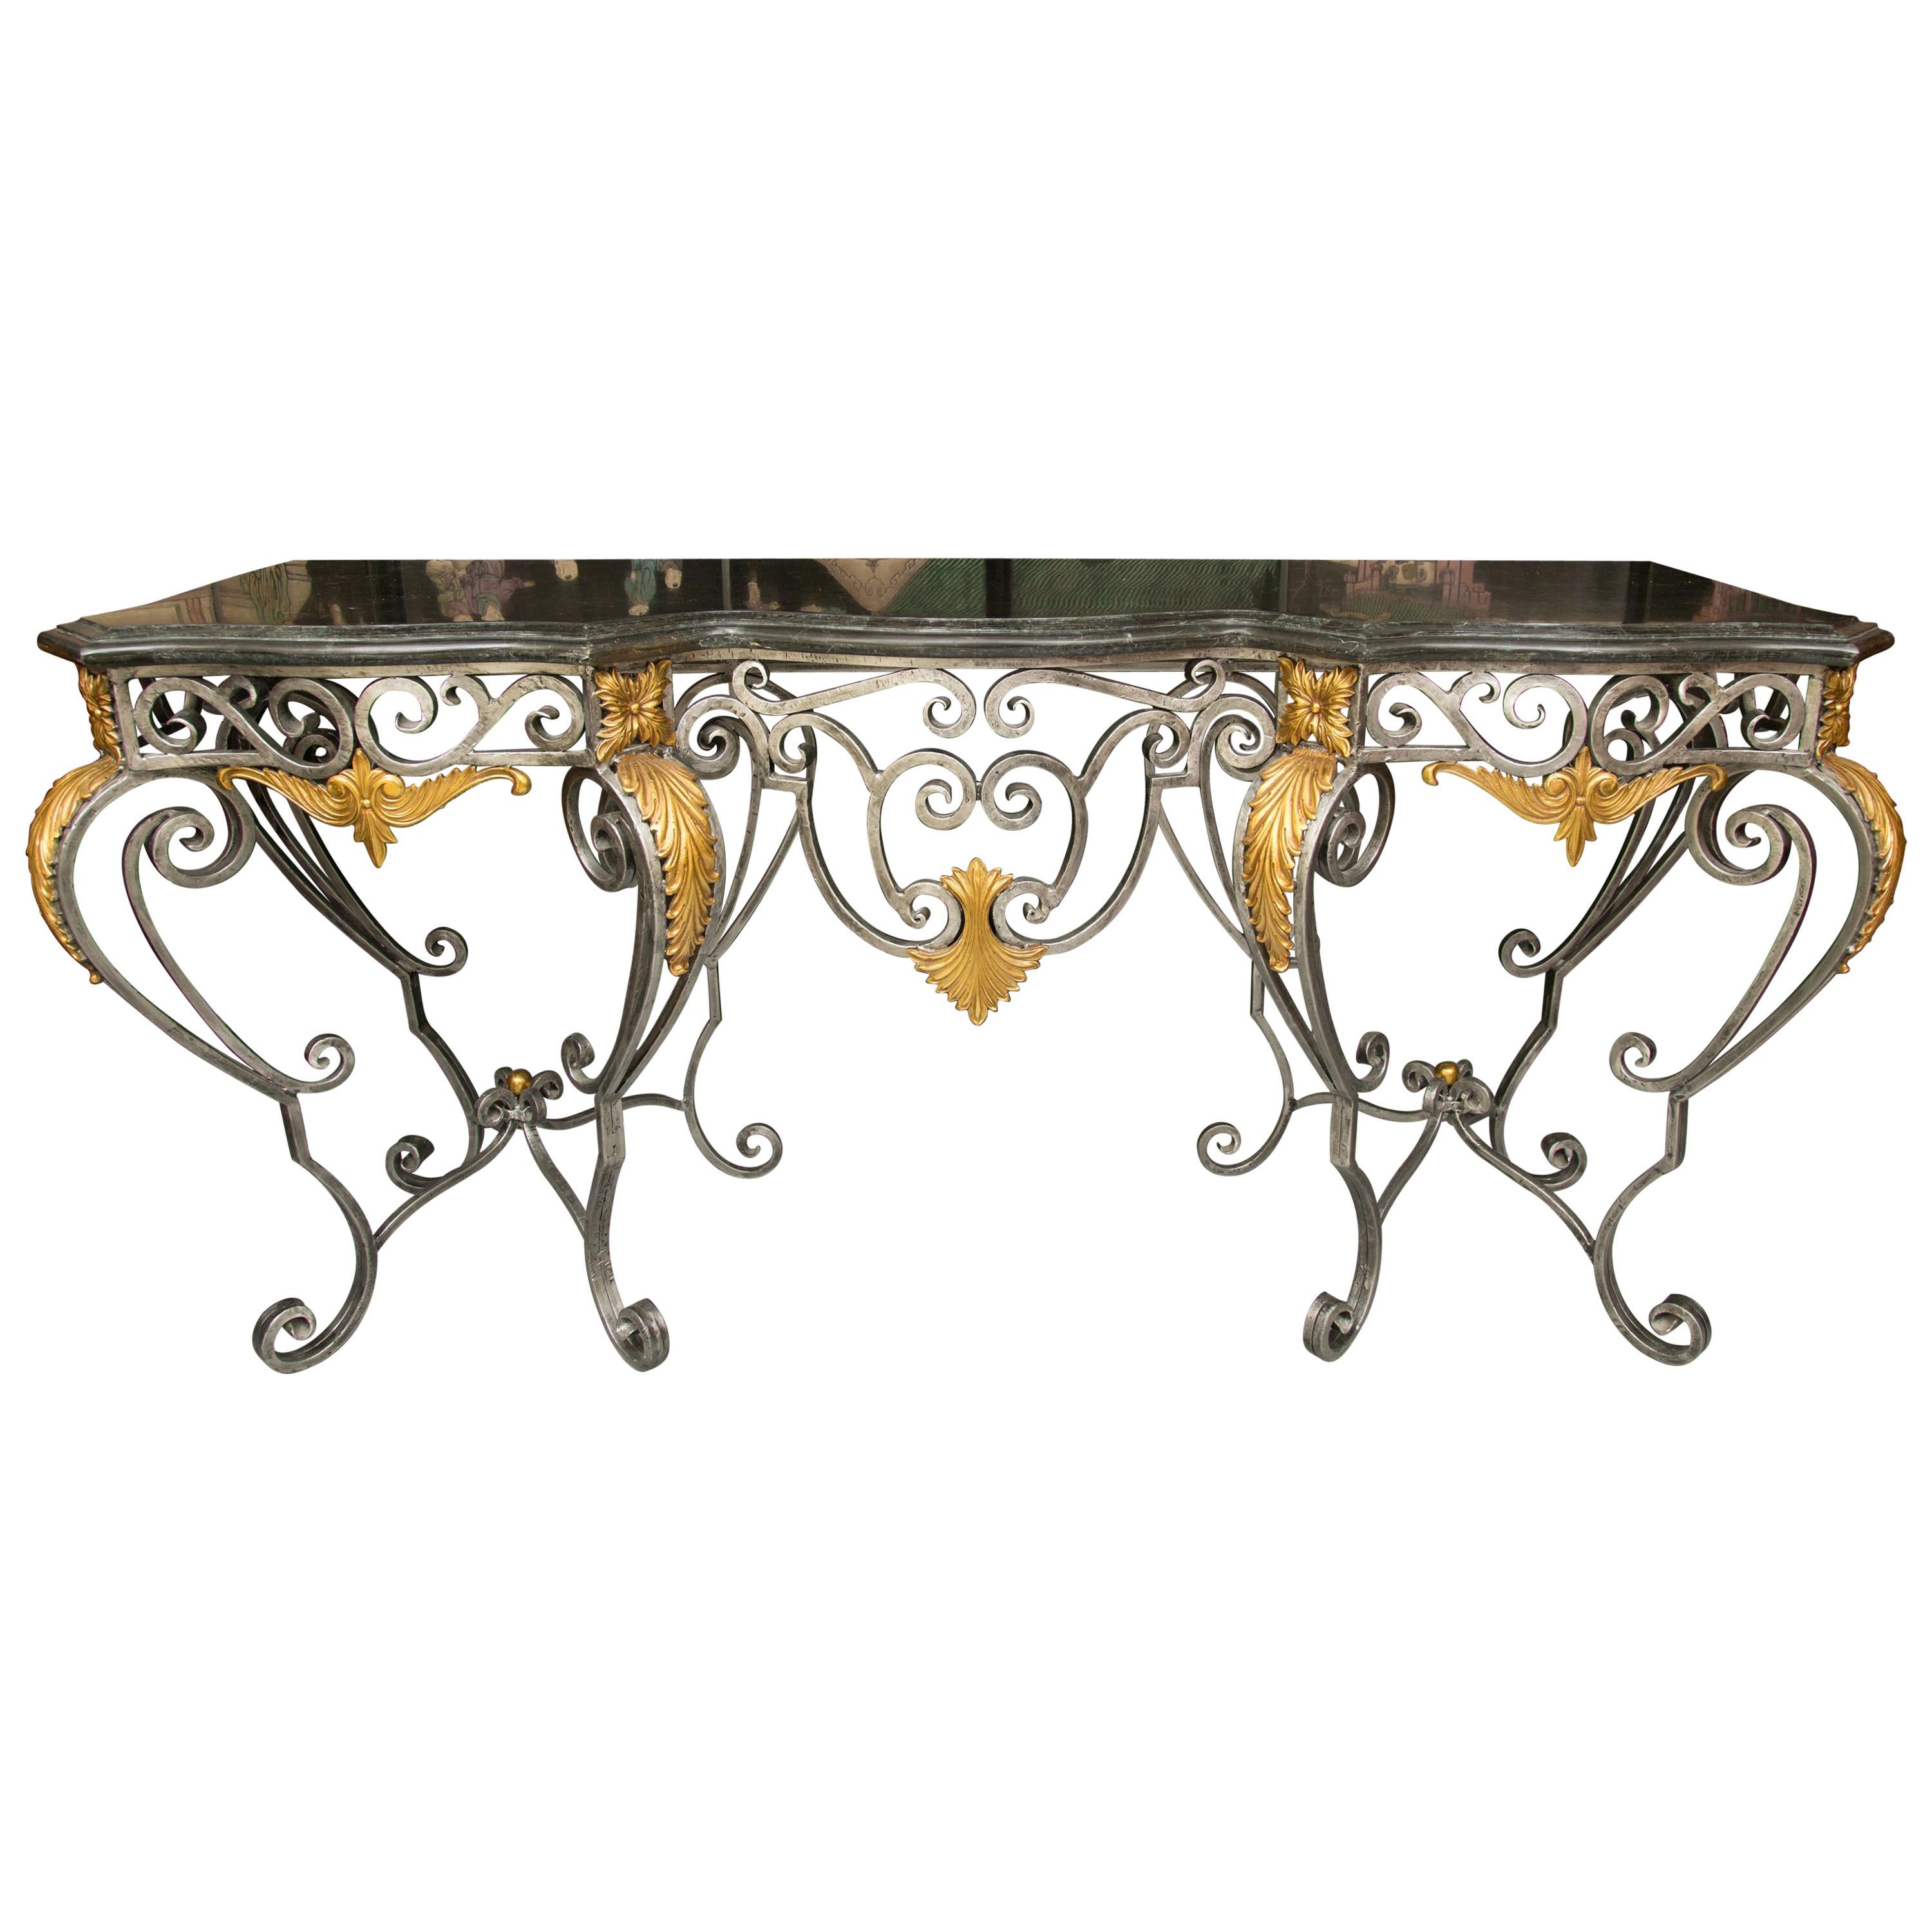 Monumental Iron Console with Gilt Decoration